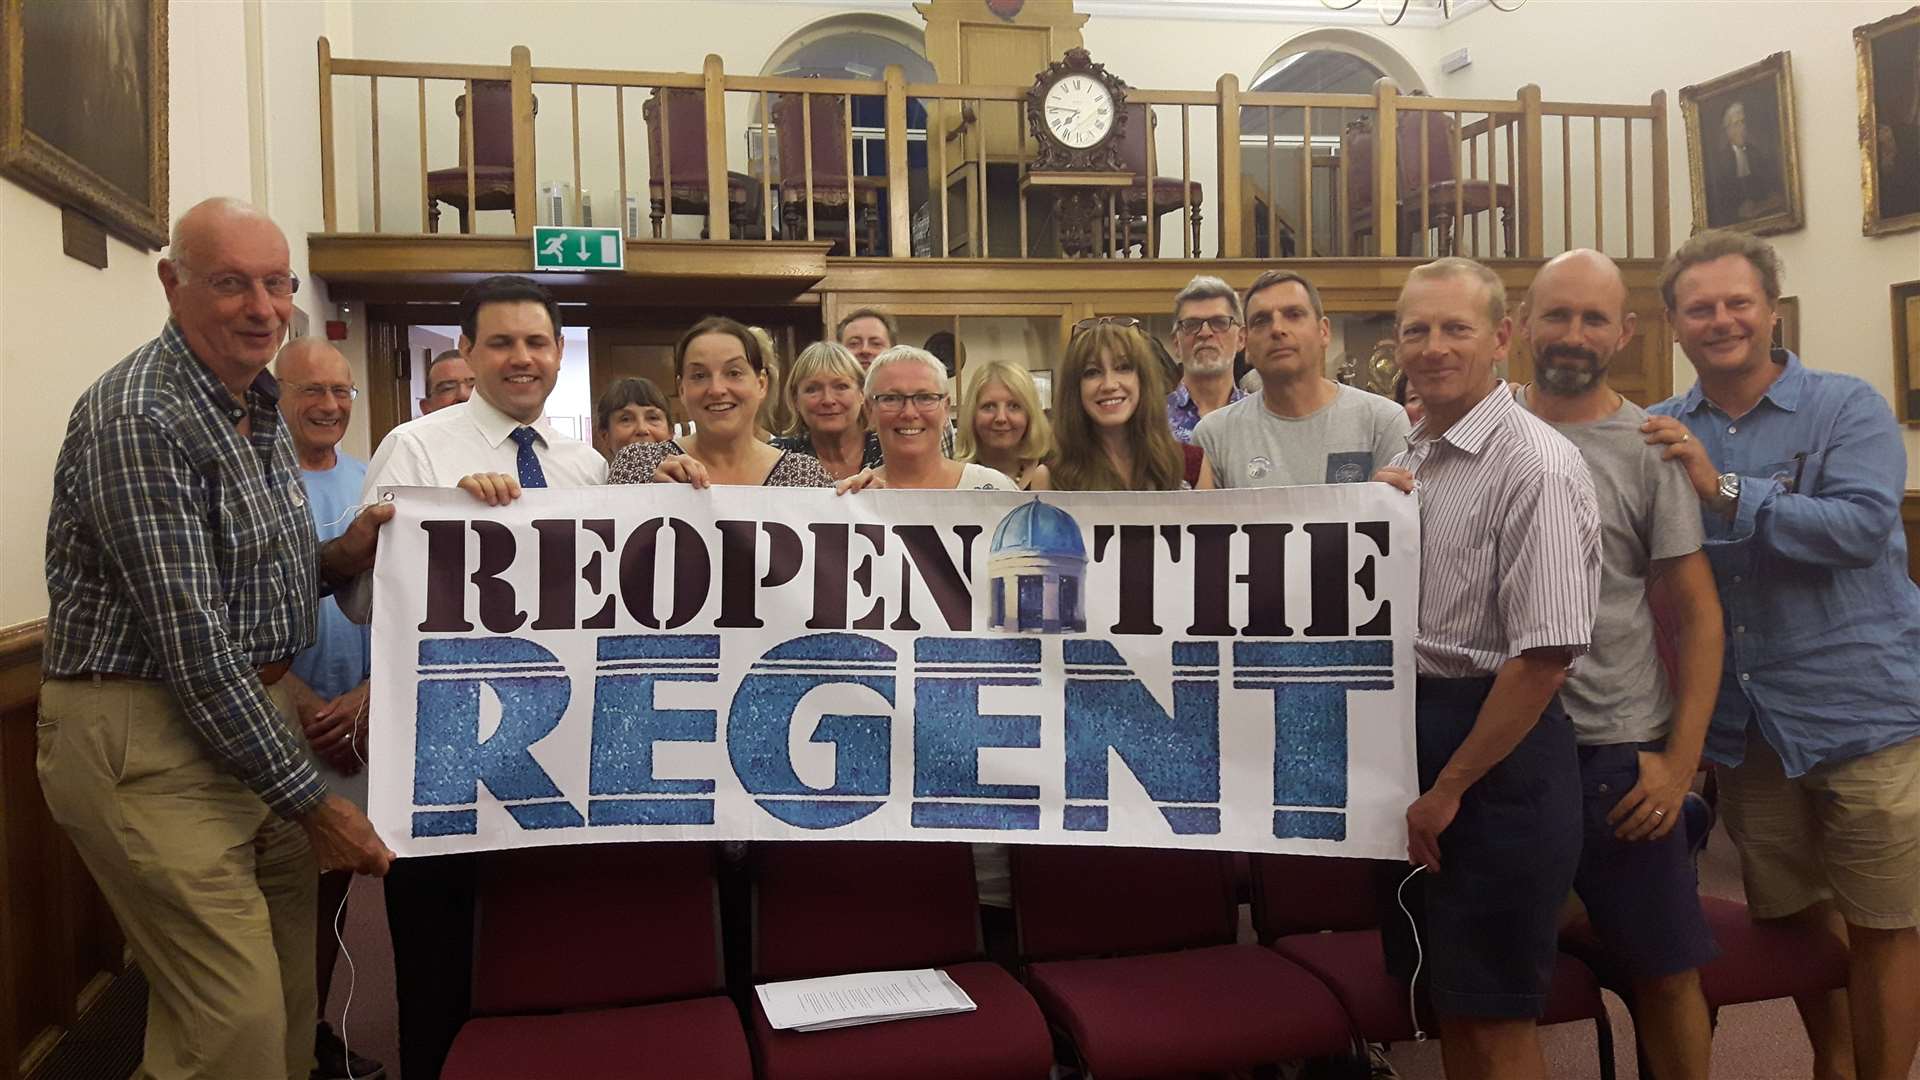 Members of the Reopen The Regent campaign group